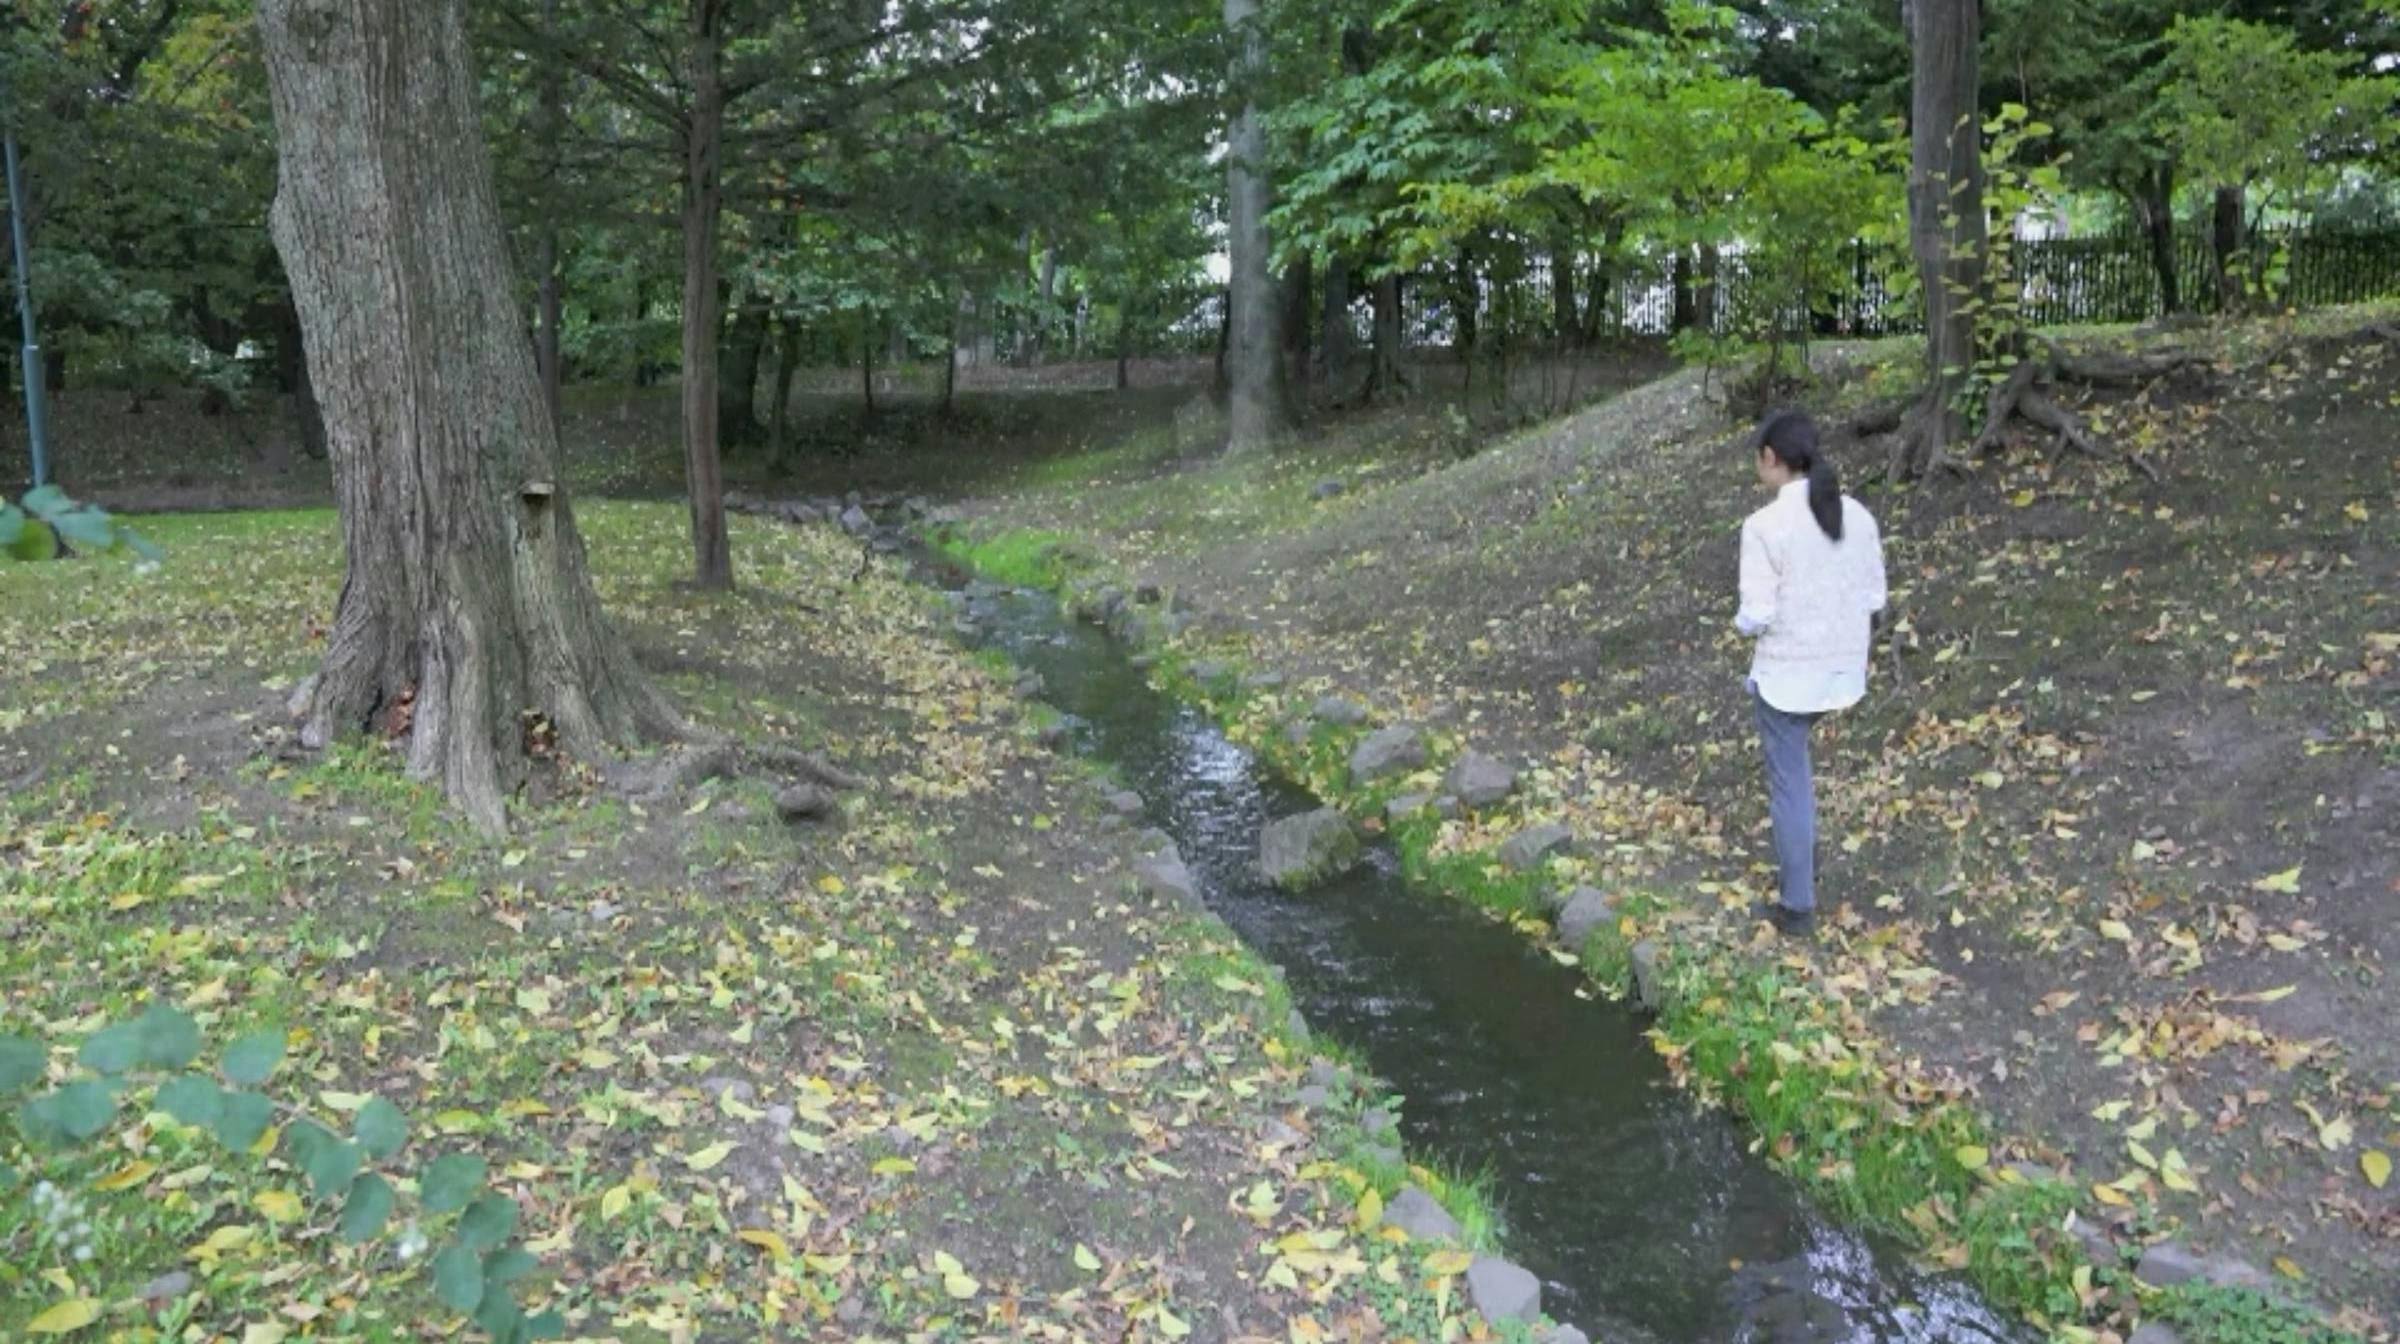 A person walks along a small stream in a forest with their back to the camera. They are wearing a white shirt.